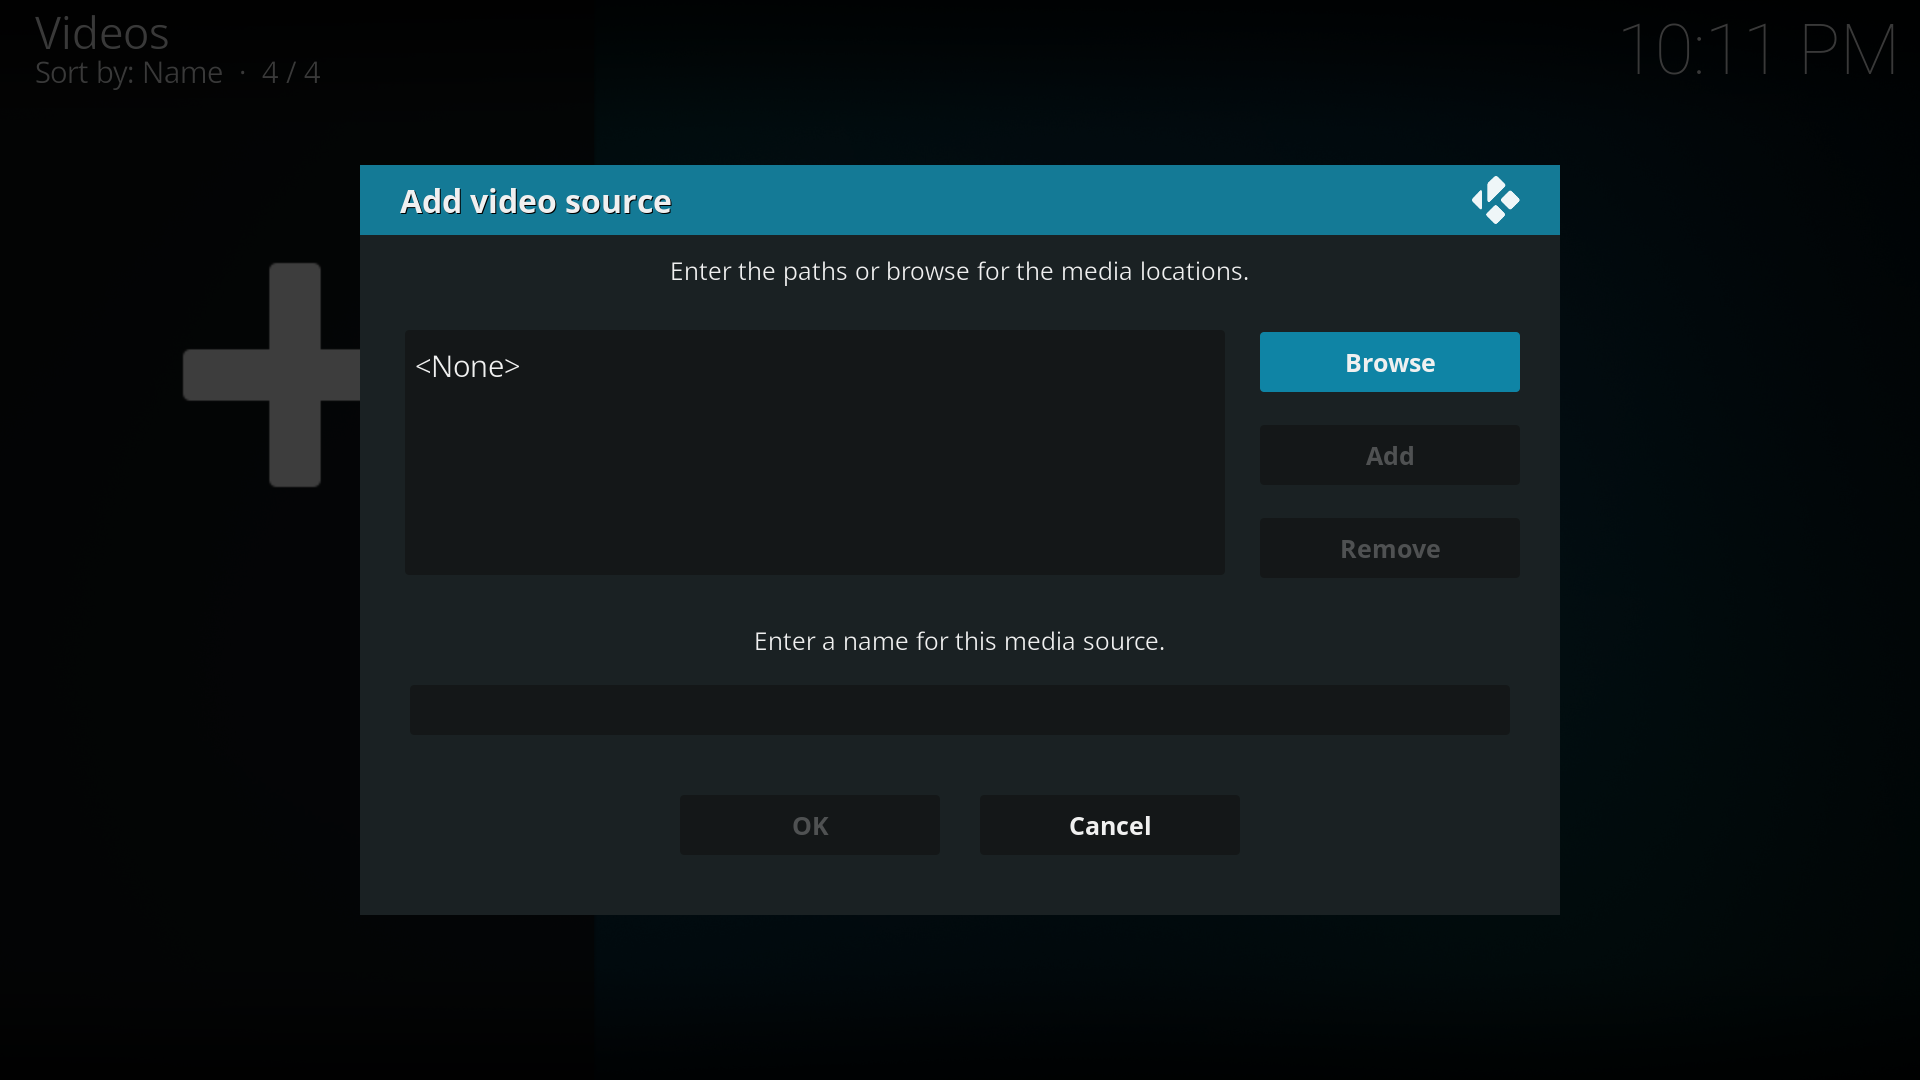 Step 3: The ADD VIDEO SOURCE window will be displayed. Then select the BROWSE button. Note: You can also type a local or network file path directly into this box, if you already know the address/path. For example, smb://192.162.0.4 or smb://Your_Device_Name could be typed in directly and saved, which will skip the "browsing" step.